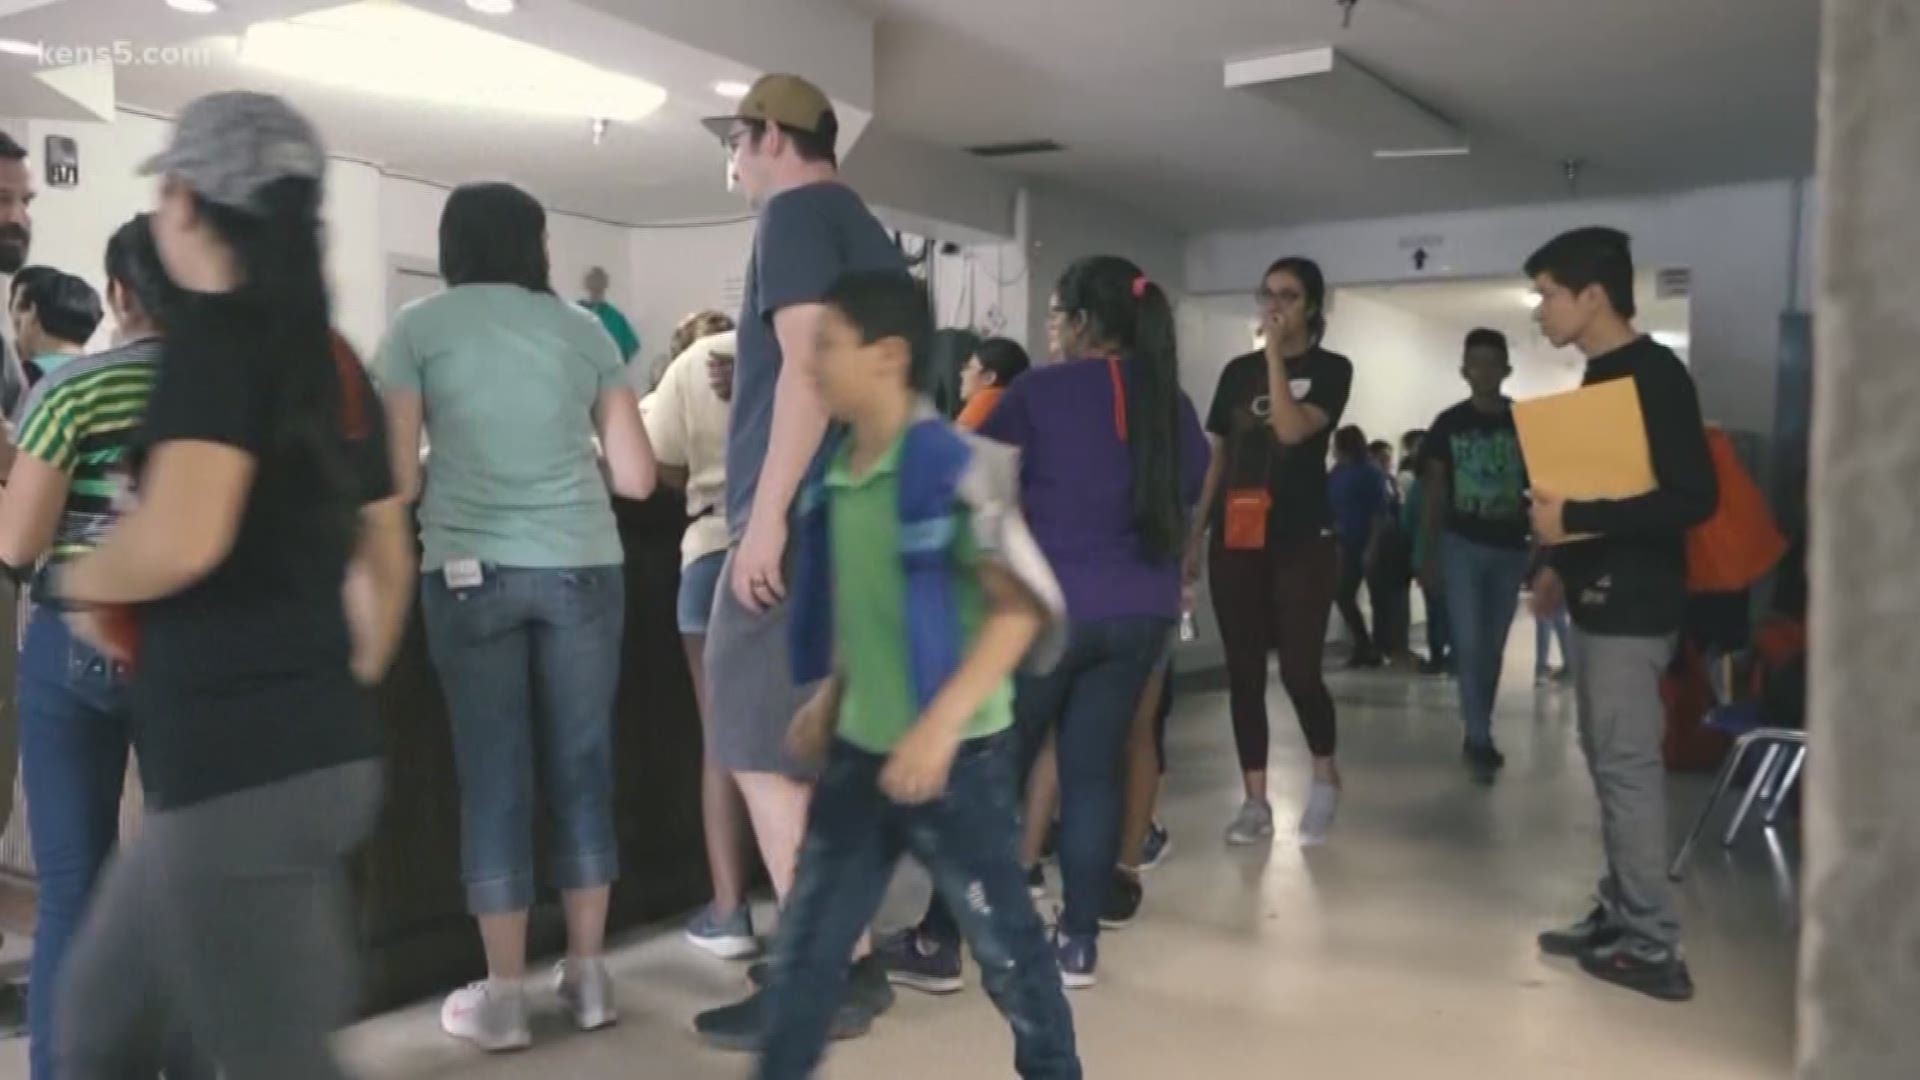 Spring breakers from across the country are flocking to south Texas right now. But not everyone's heading to beaches and parties. Our border reporter Oscar Margain is in McAllen. He shows us why some are spending their vacations helping migrant families.